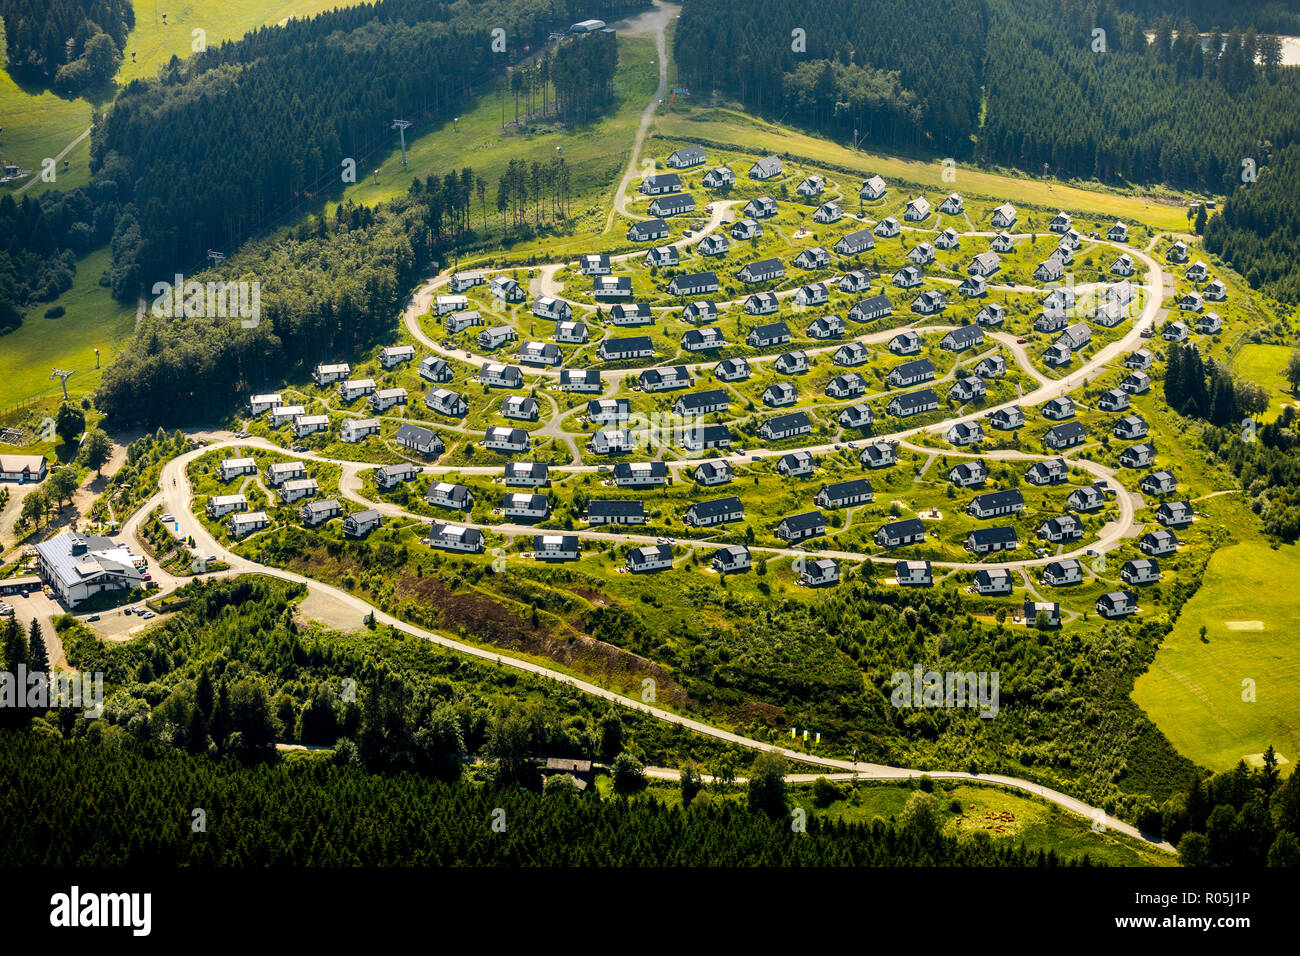 Aerial view, Holiday cottages Landal Winterberg, Apartments, Boredom, uniformity, standard construction, monotony, hilltop with standard houses, circu Stock Photo